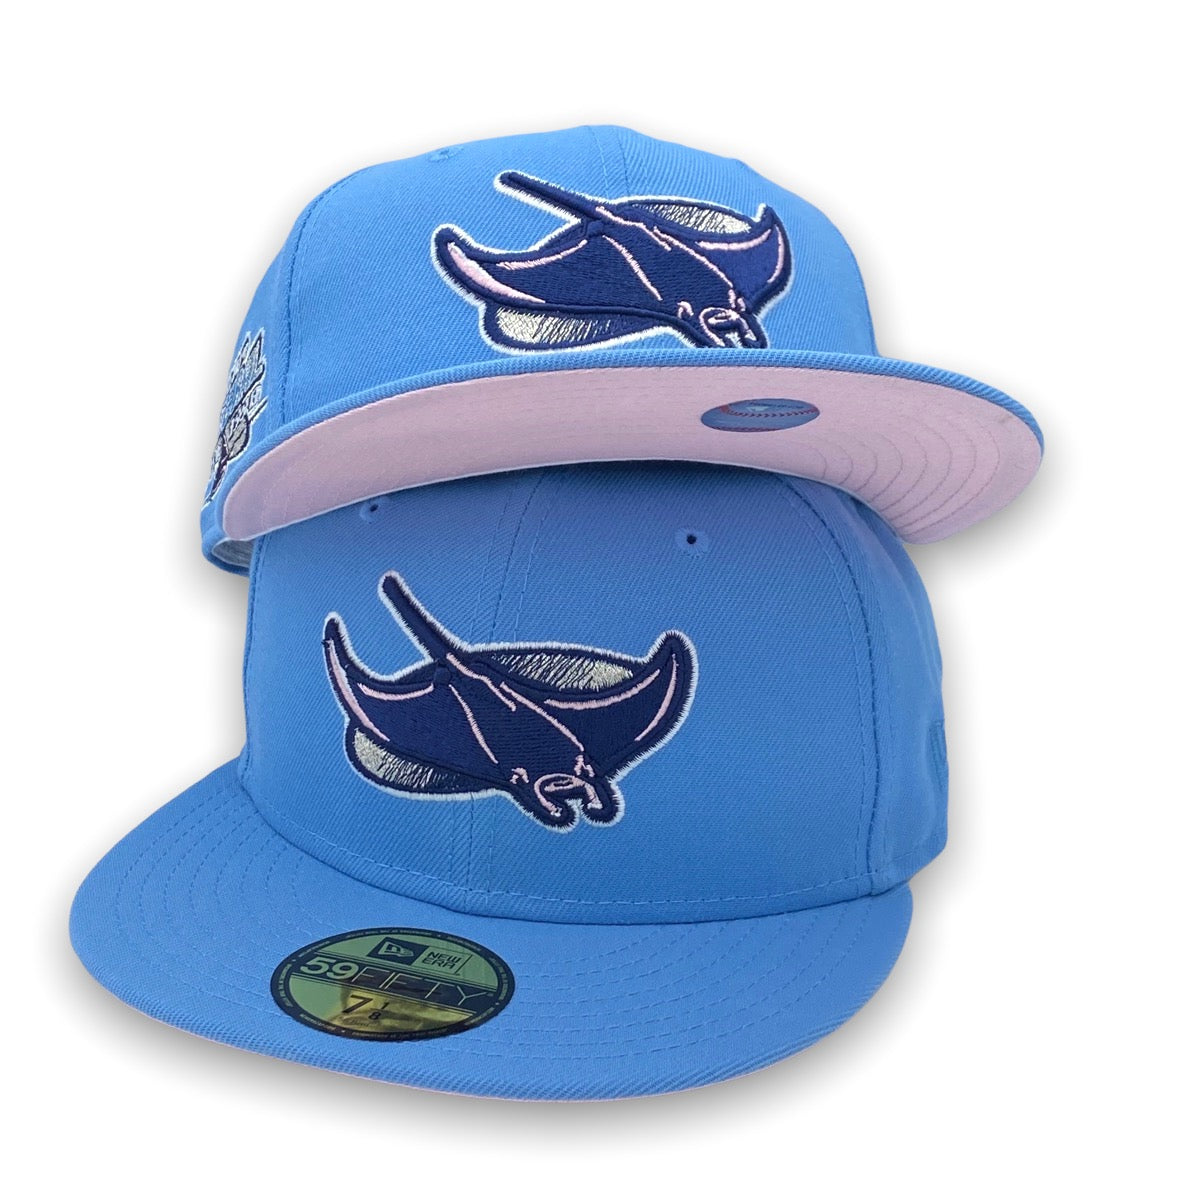 Cotton Candy Coll. Tampa Bay Rays 98 IS. New Era 59FIFTY Sky Blue